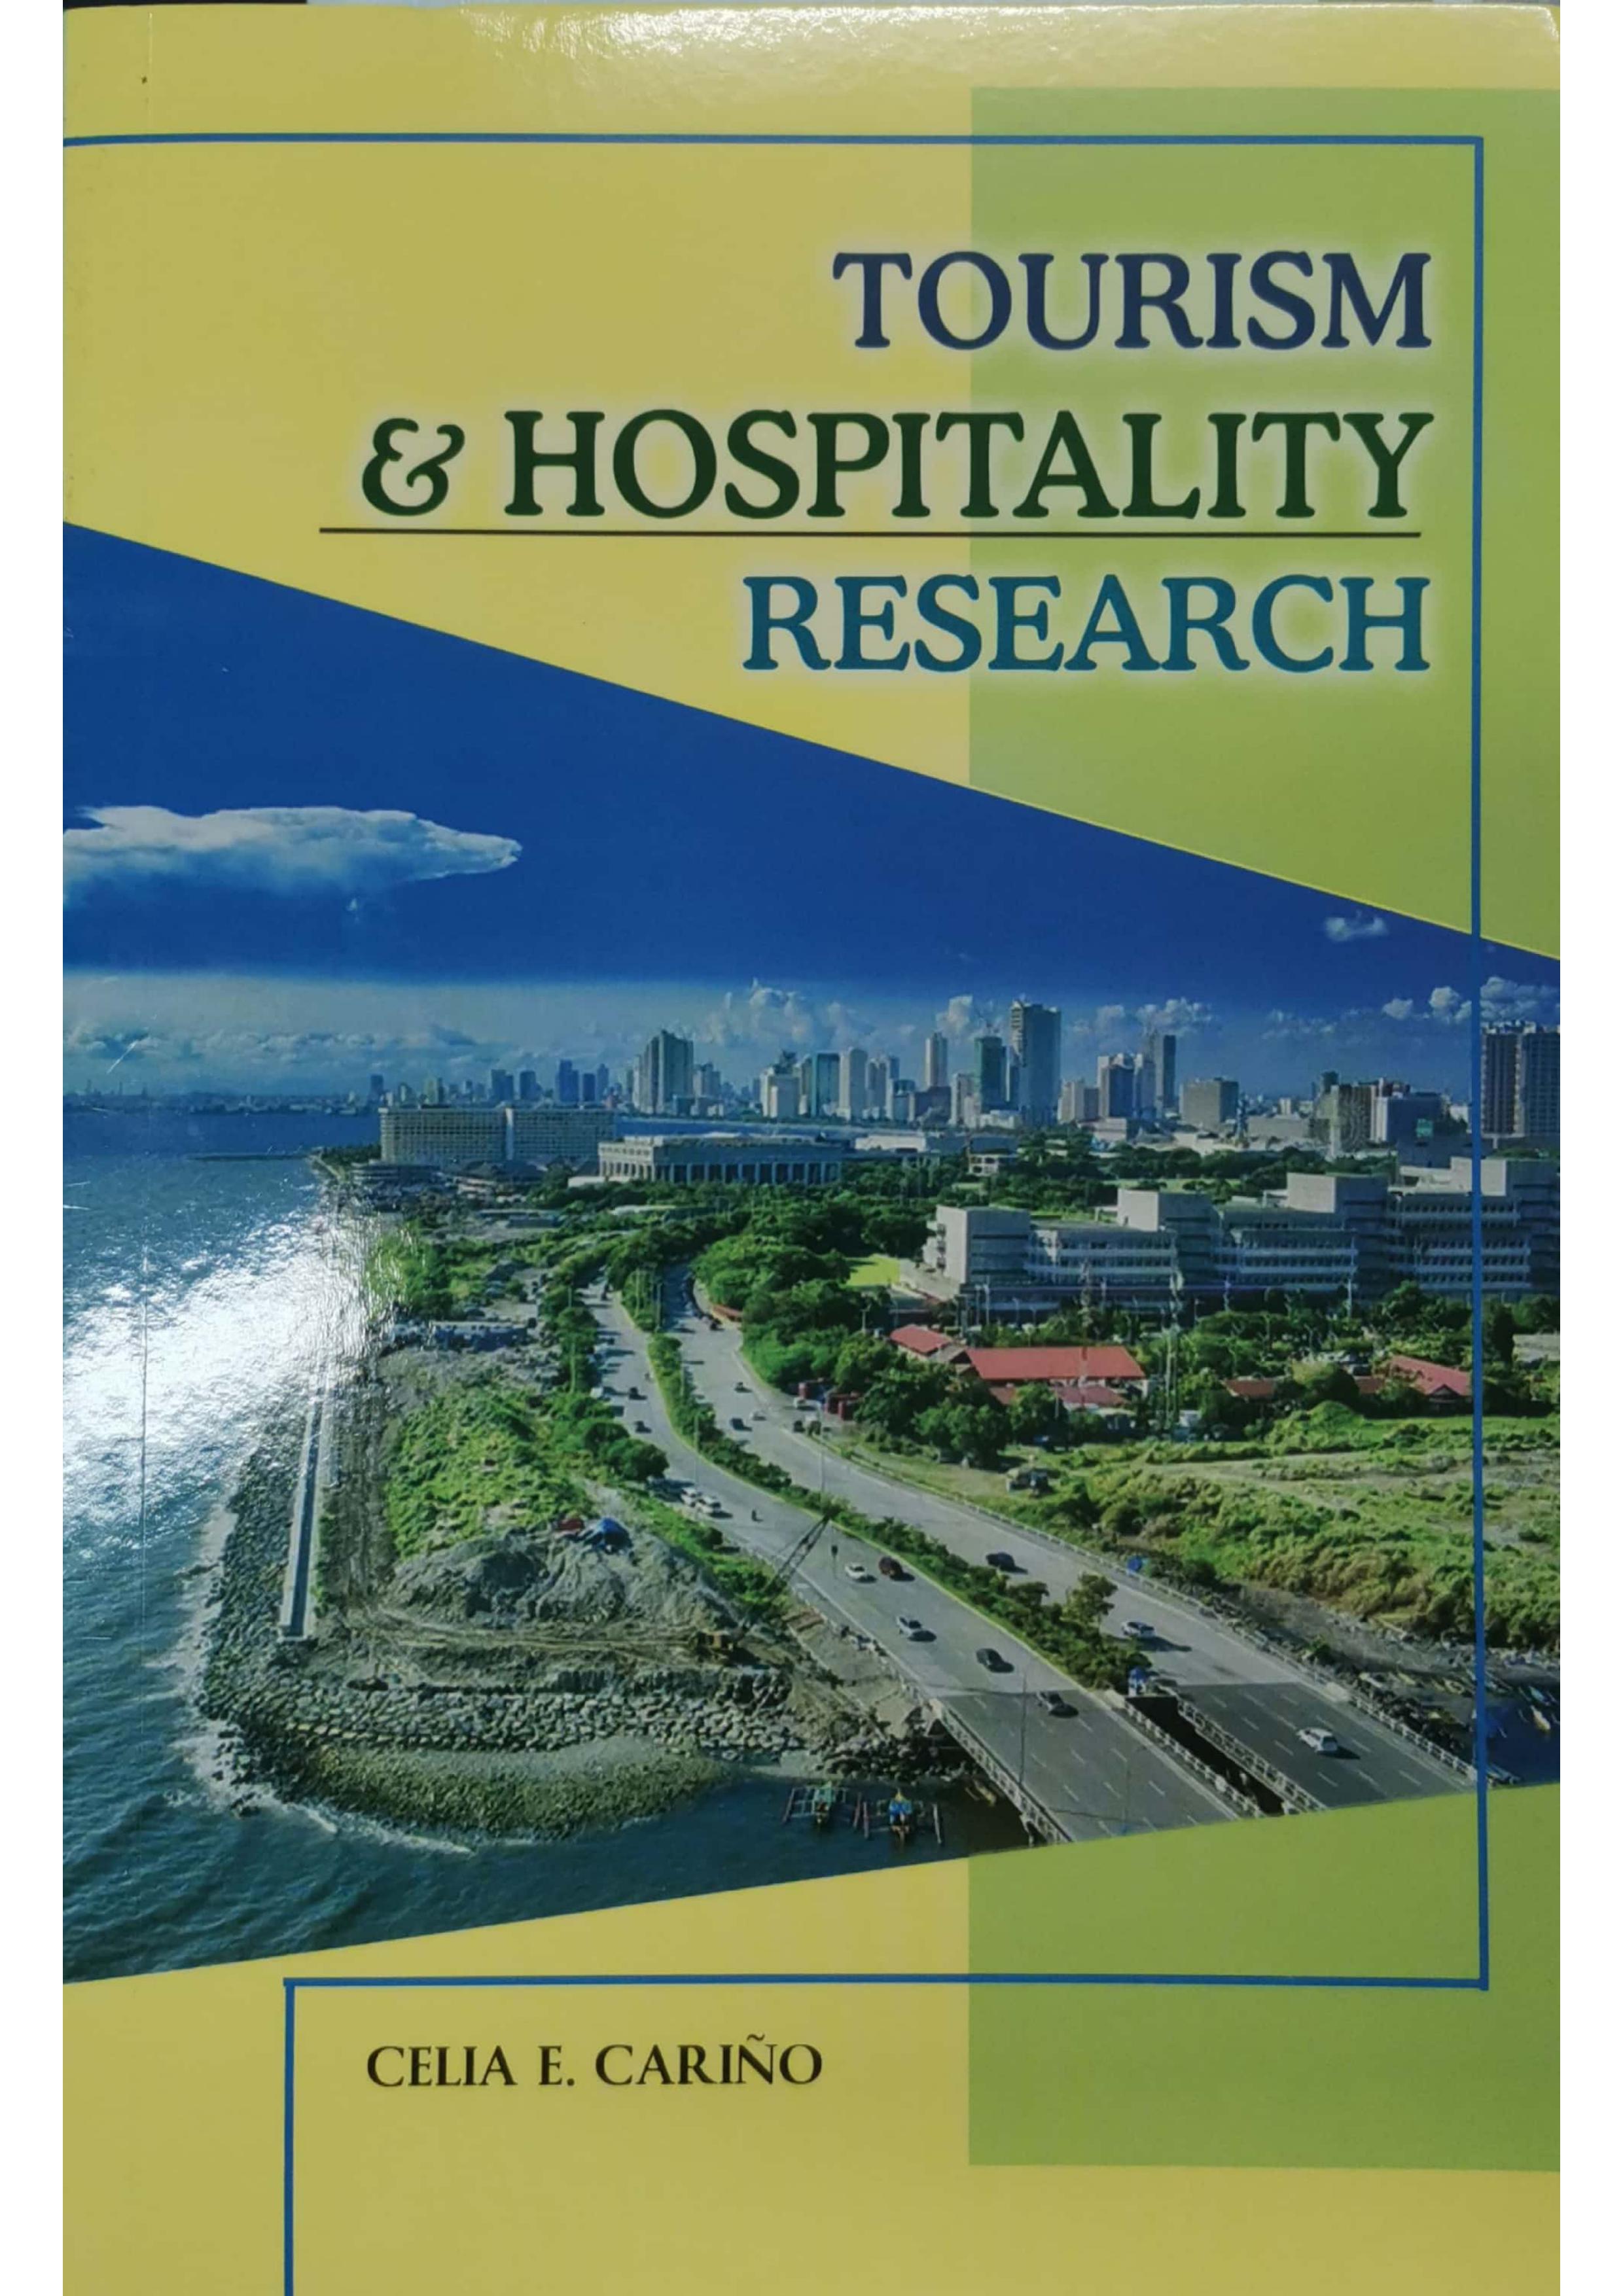 tourism and hospitality research topics